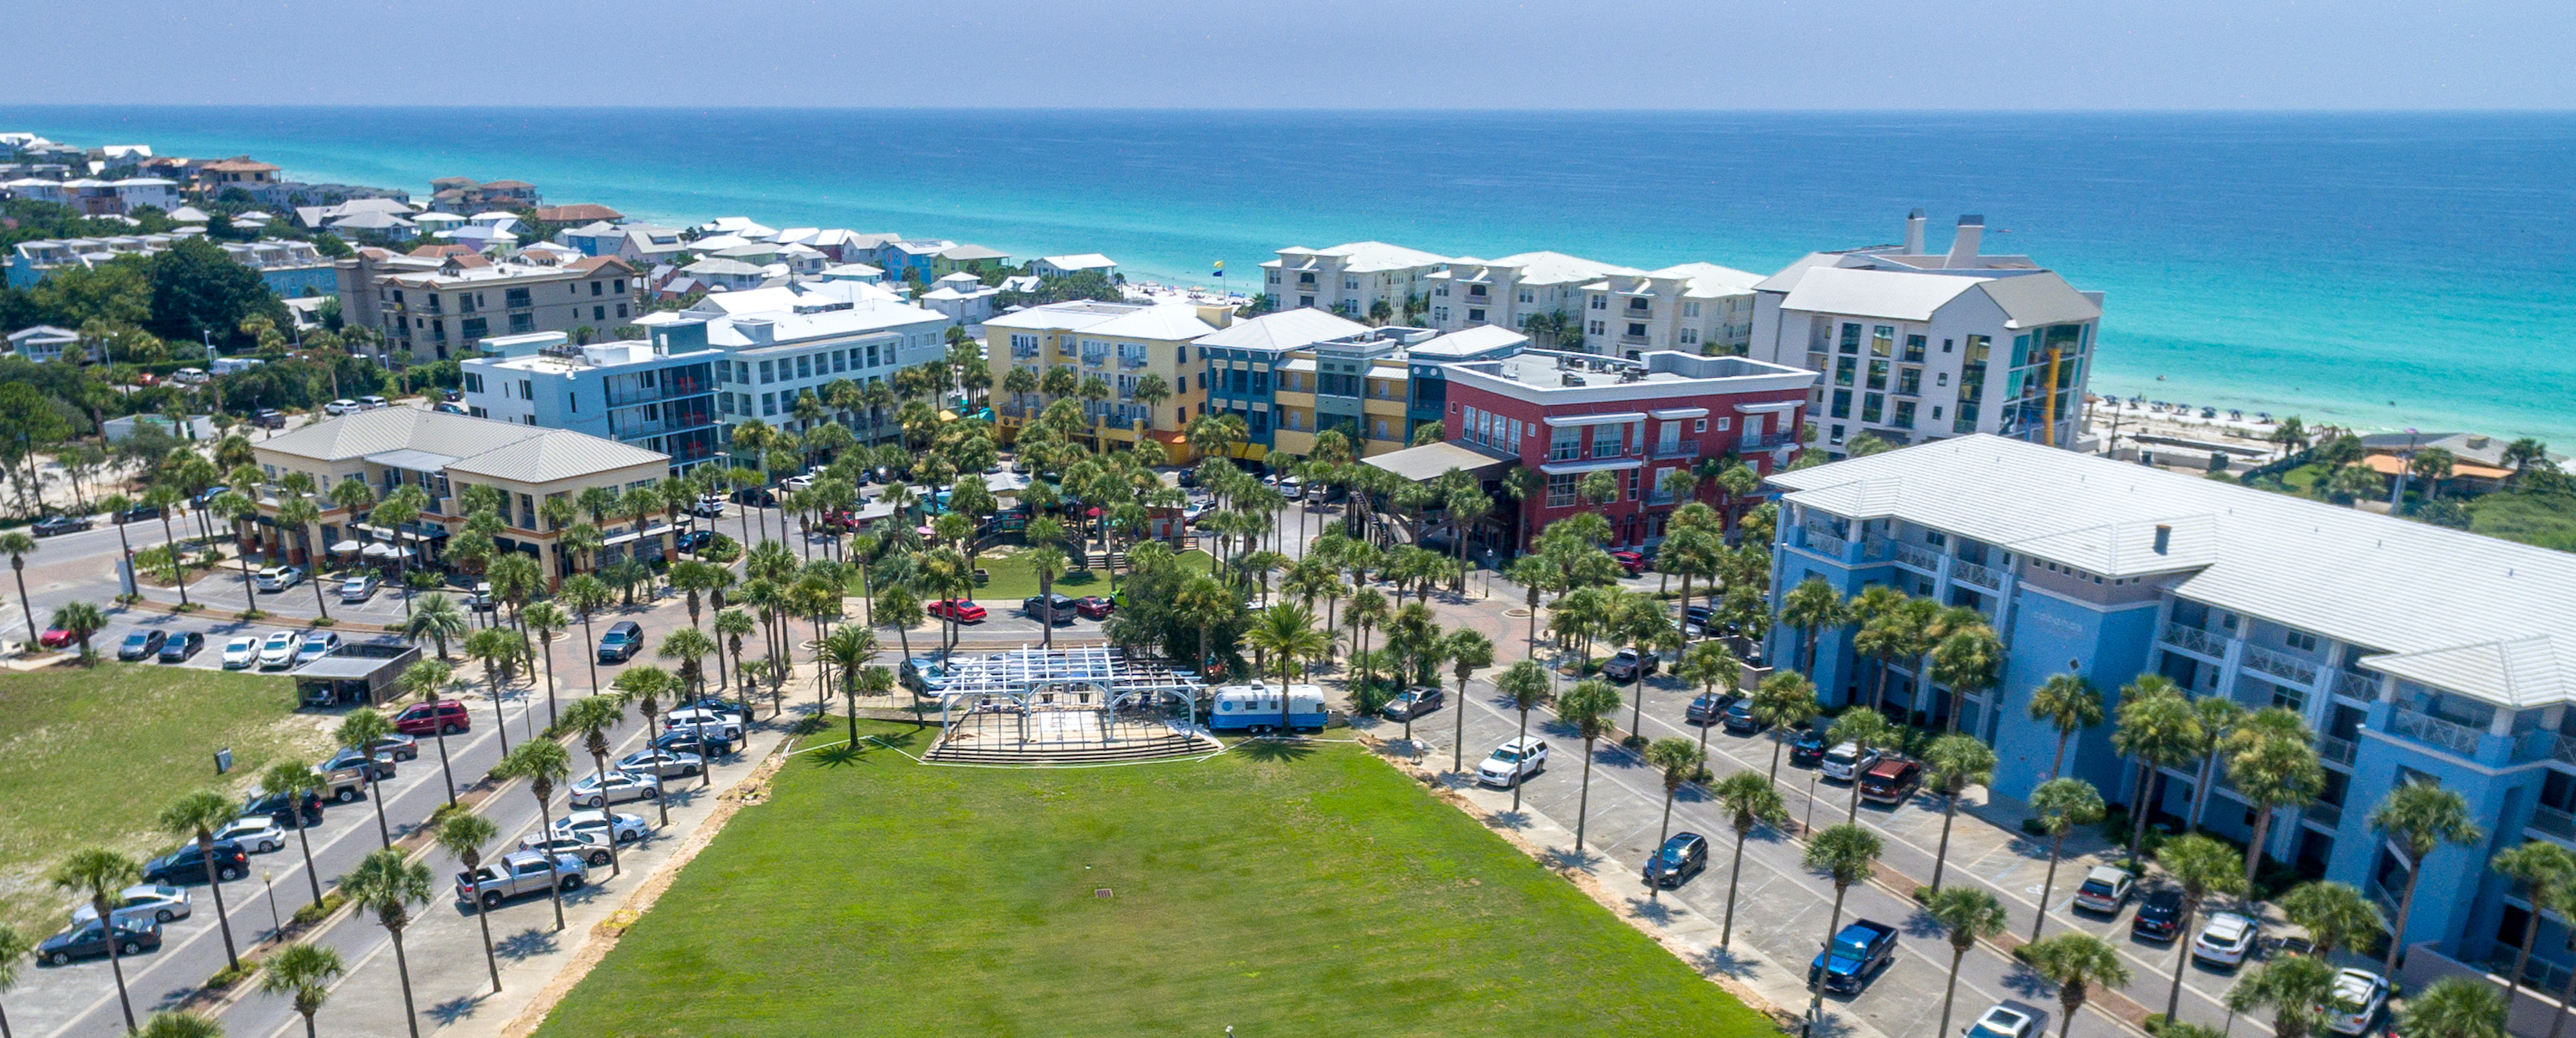 An aerial view of the Gulf Place town center including the lawn and blue gulf waters in the background